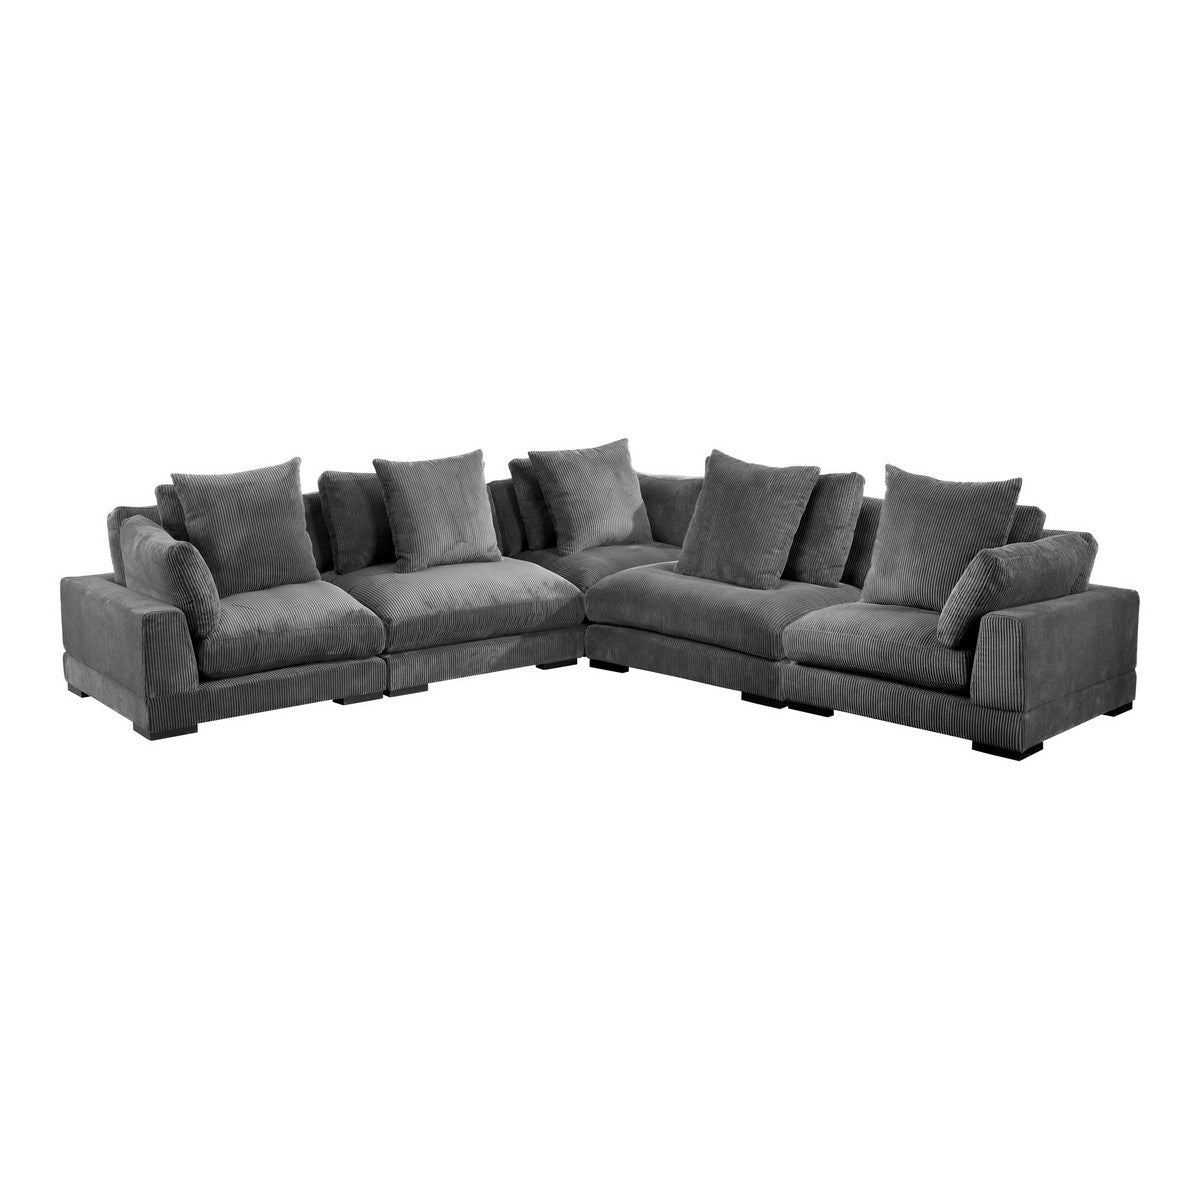 Moe's Home Collection Tumble Classic L Modular Sectional Charcoal - UB-1014-25 - Moe's Home Collection - Extras - Minimal And Modern - 1